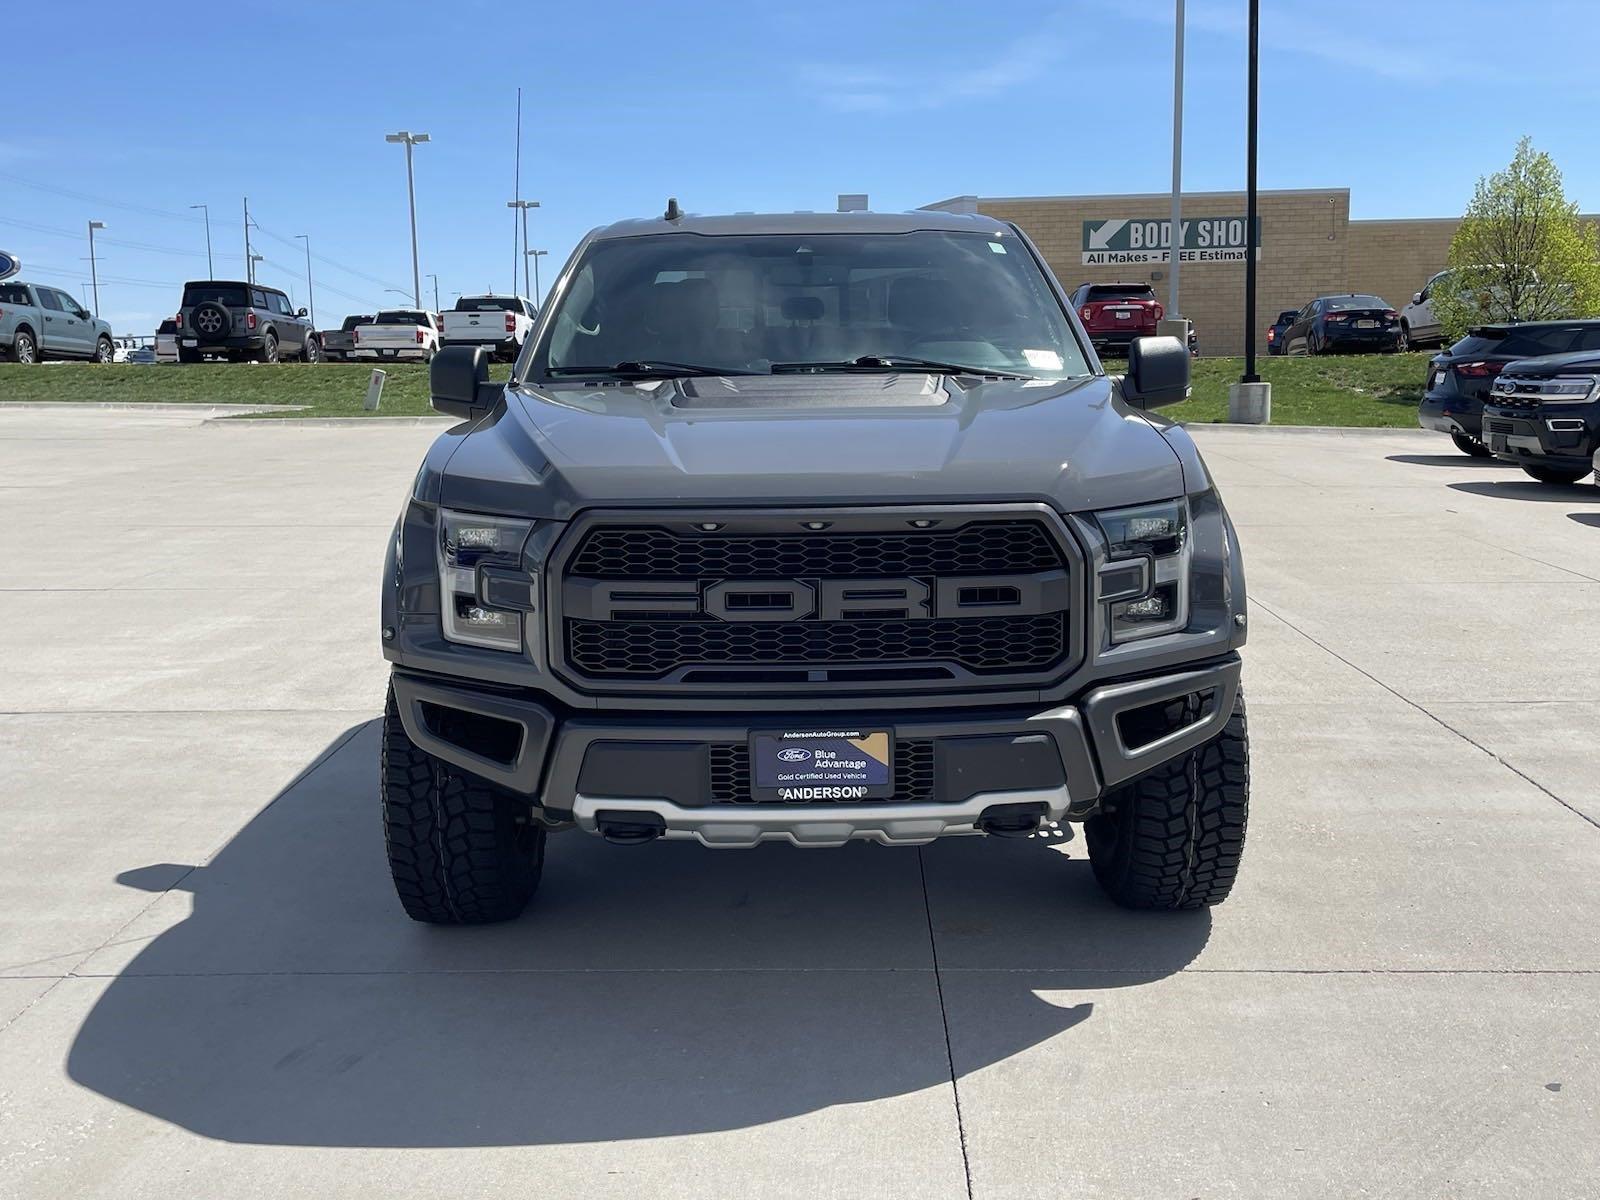 Used 2020 Ford F-150 Raptor Crew Cab Truck for sale in Lincoln NE